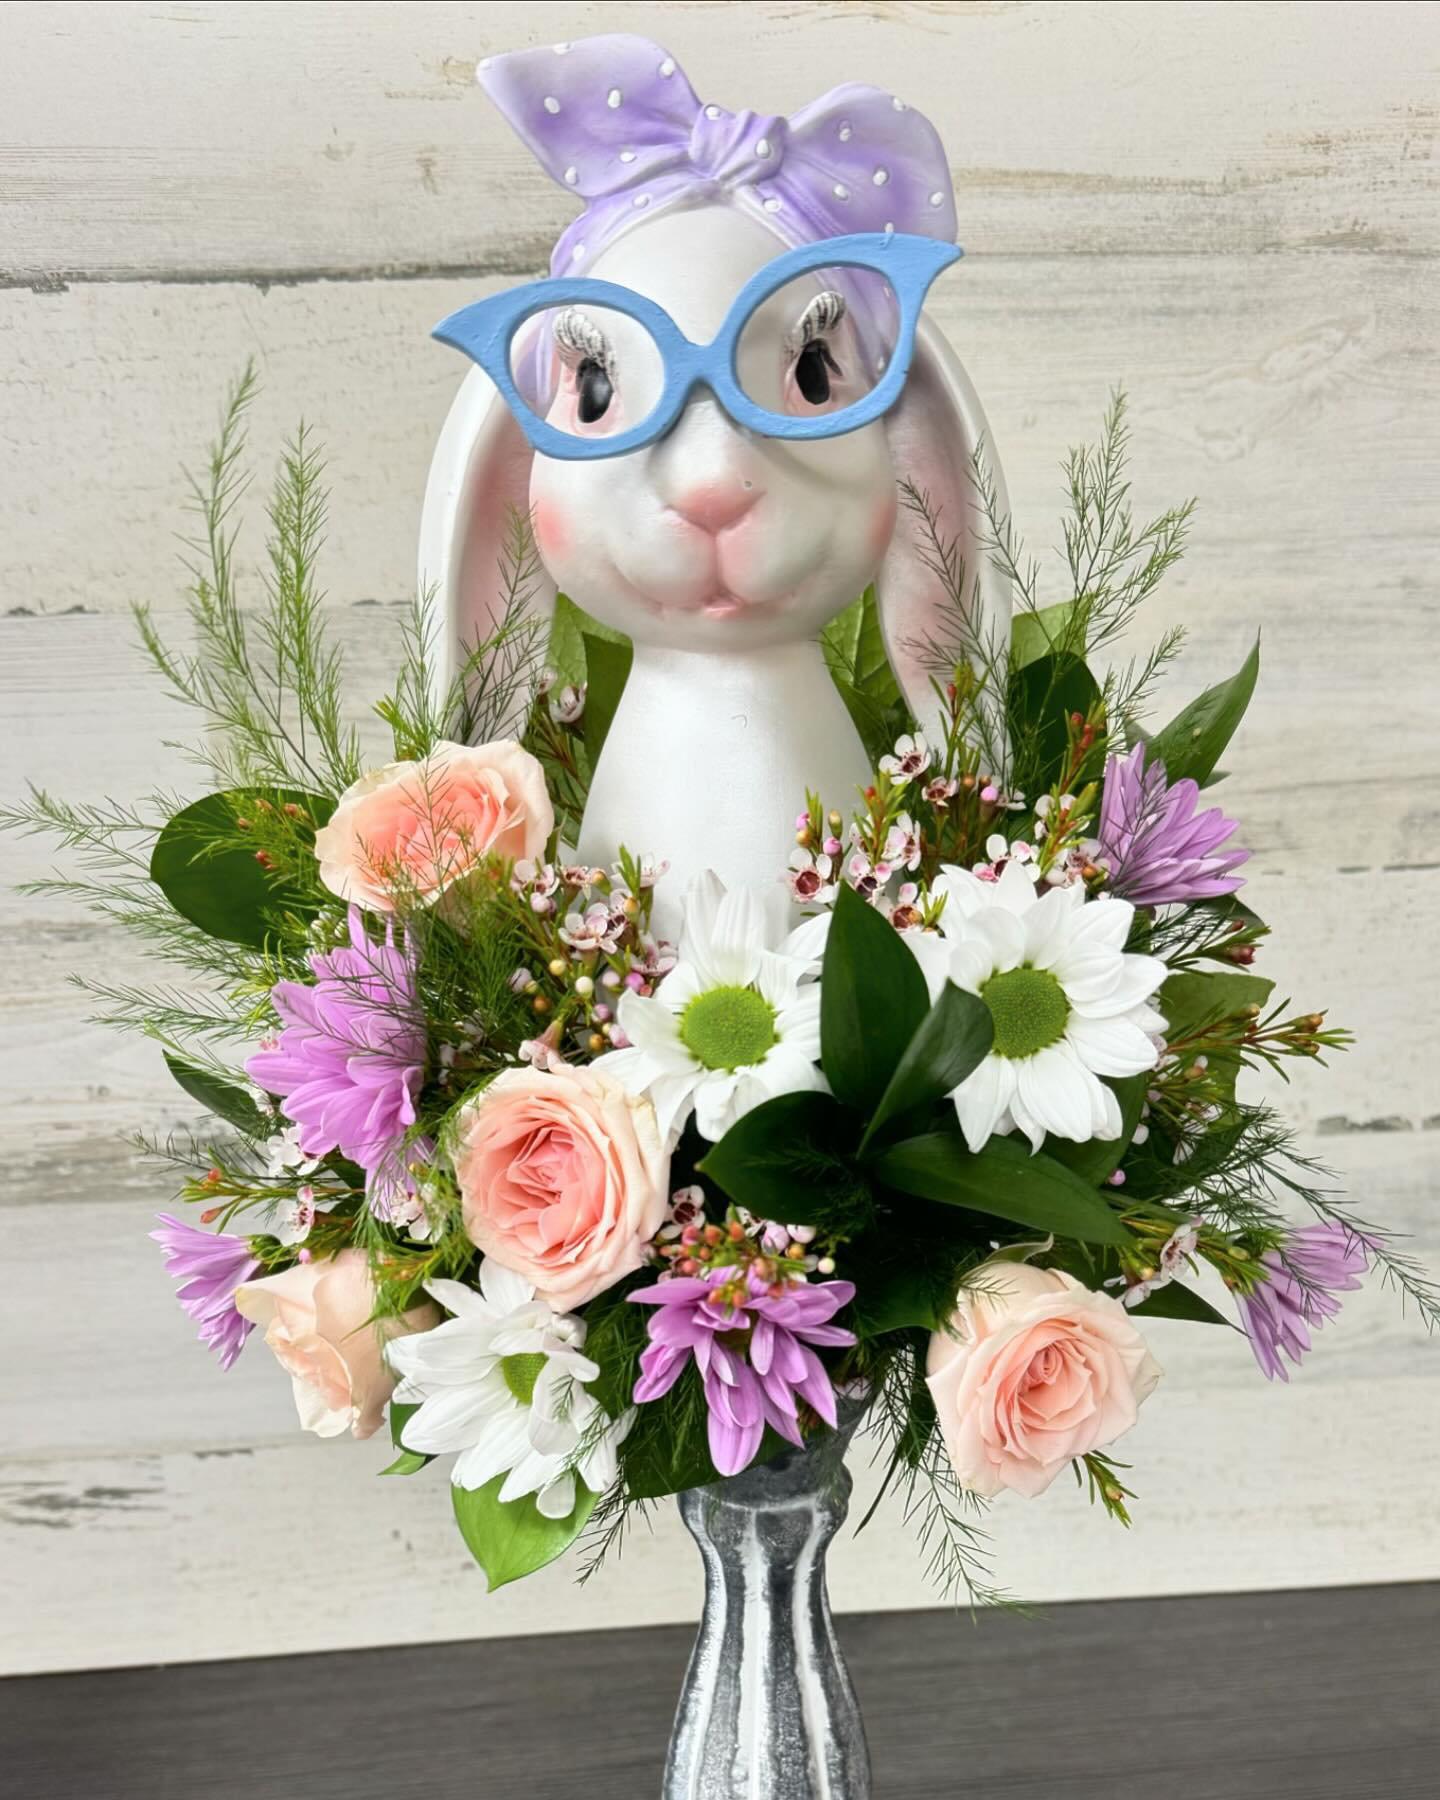 Easter is early this year, book your Easter arrangements now, we have some really cute new merchandise in. 🐰